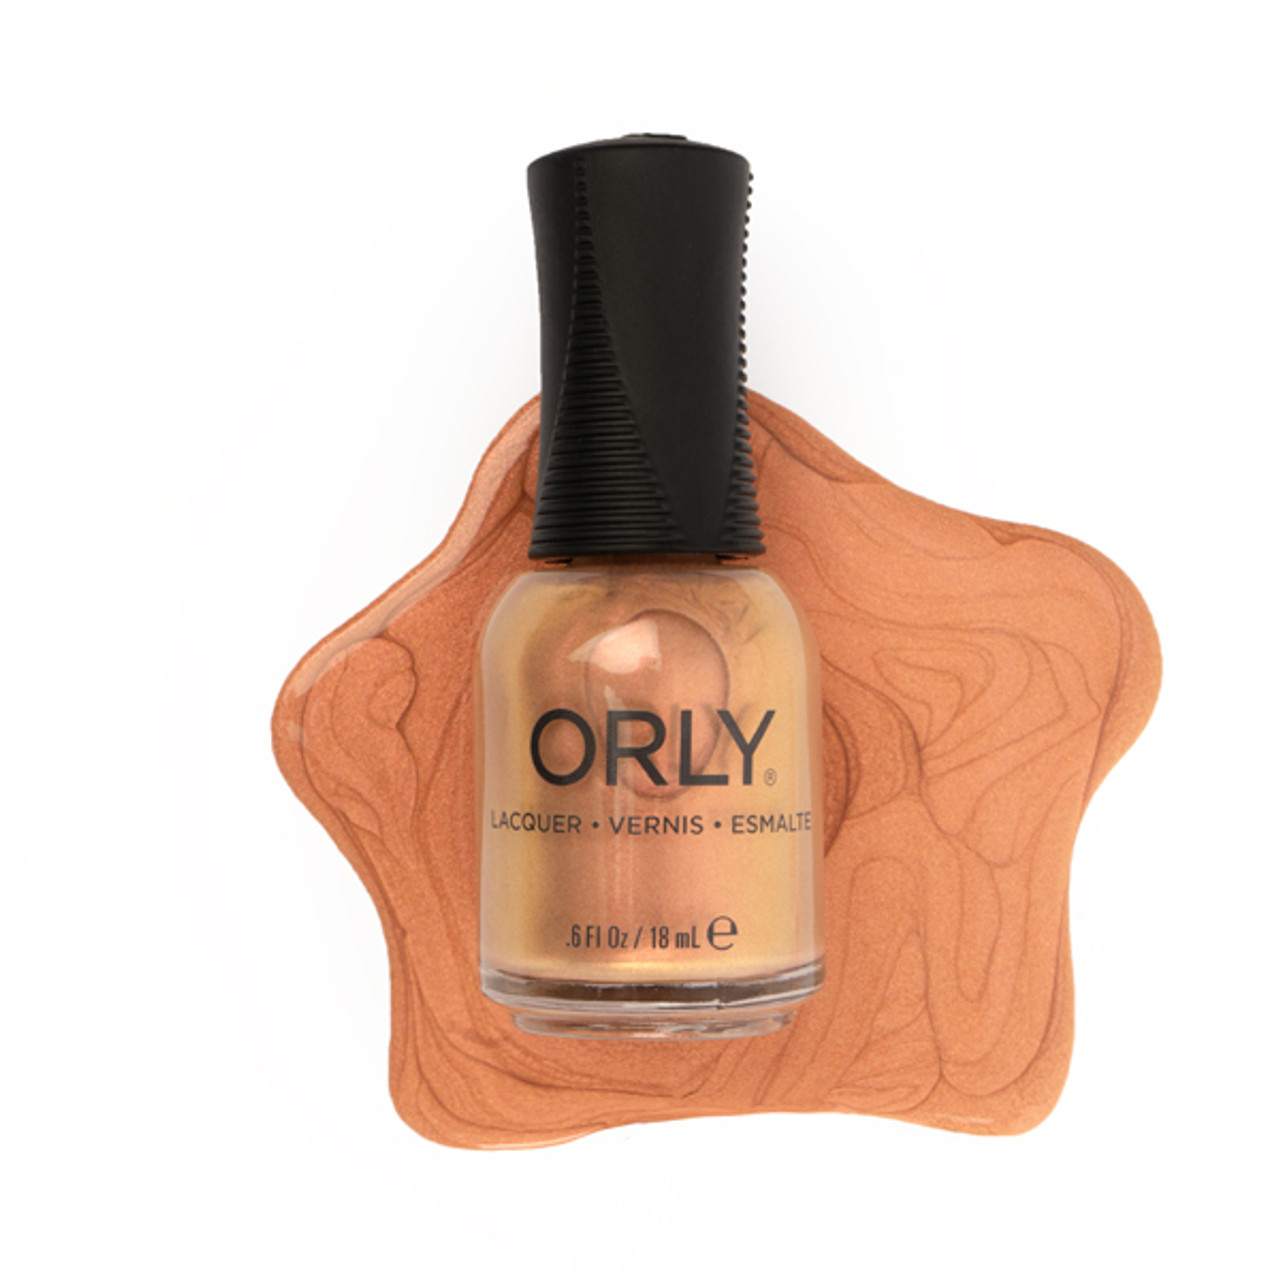 ORLY Nail Lacquer Golden Waves - .6 fl oz / 18 mL